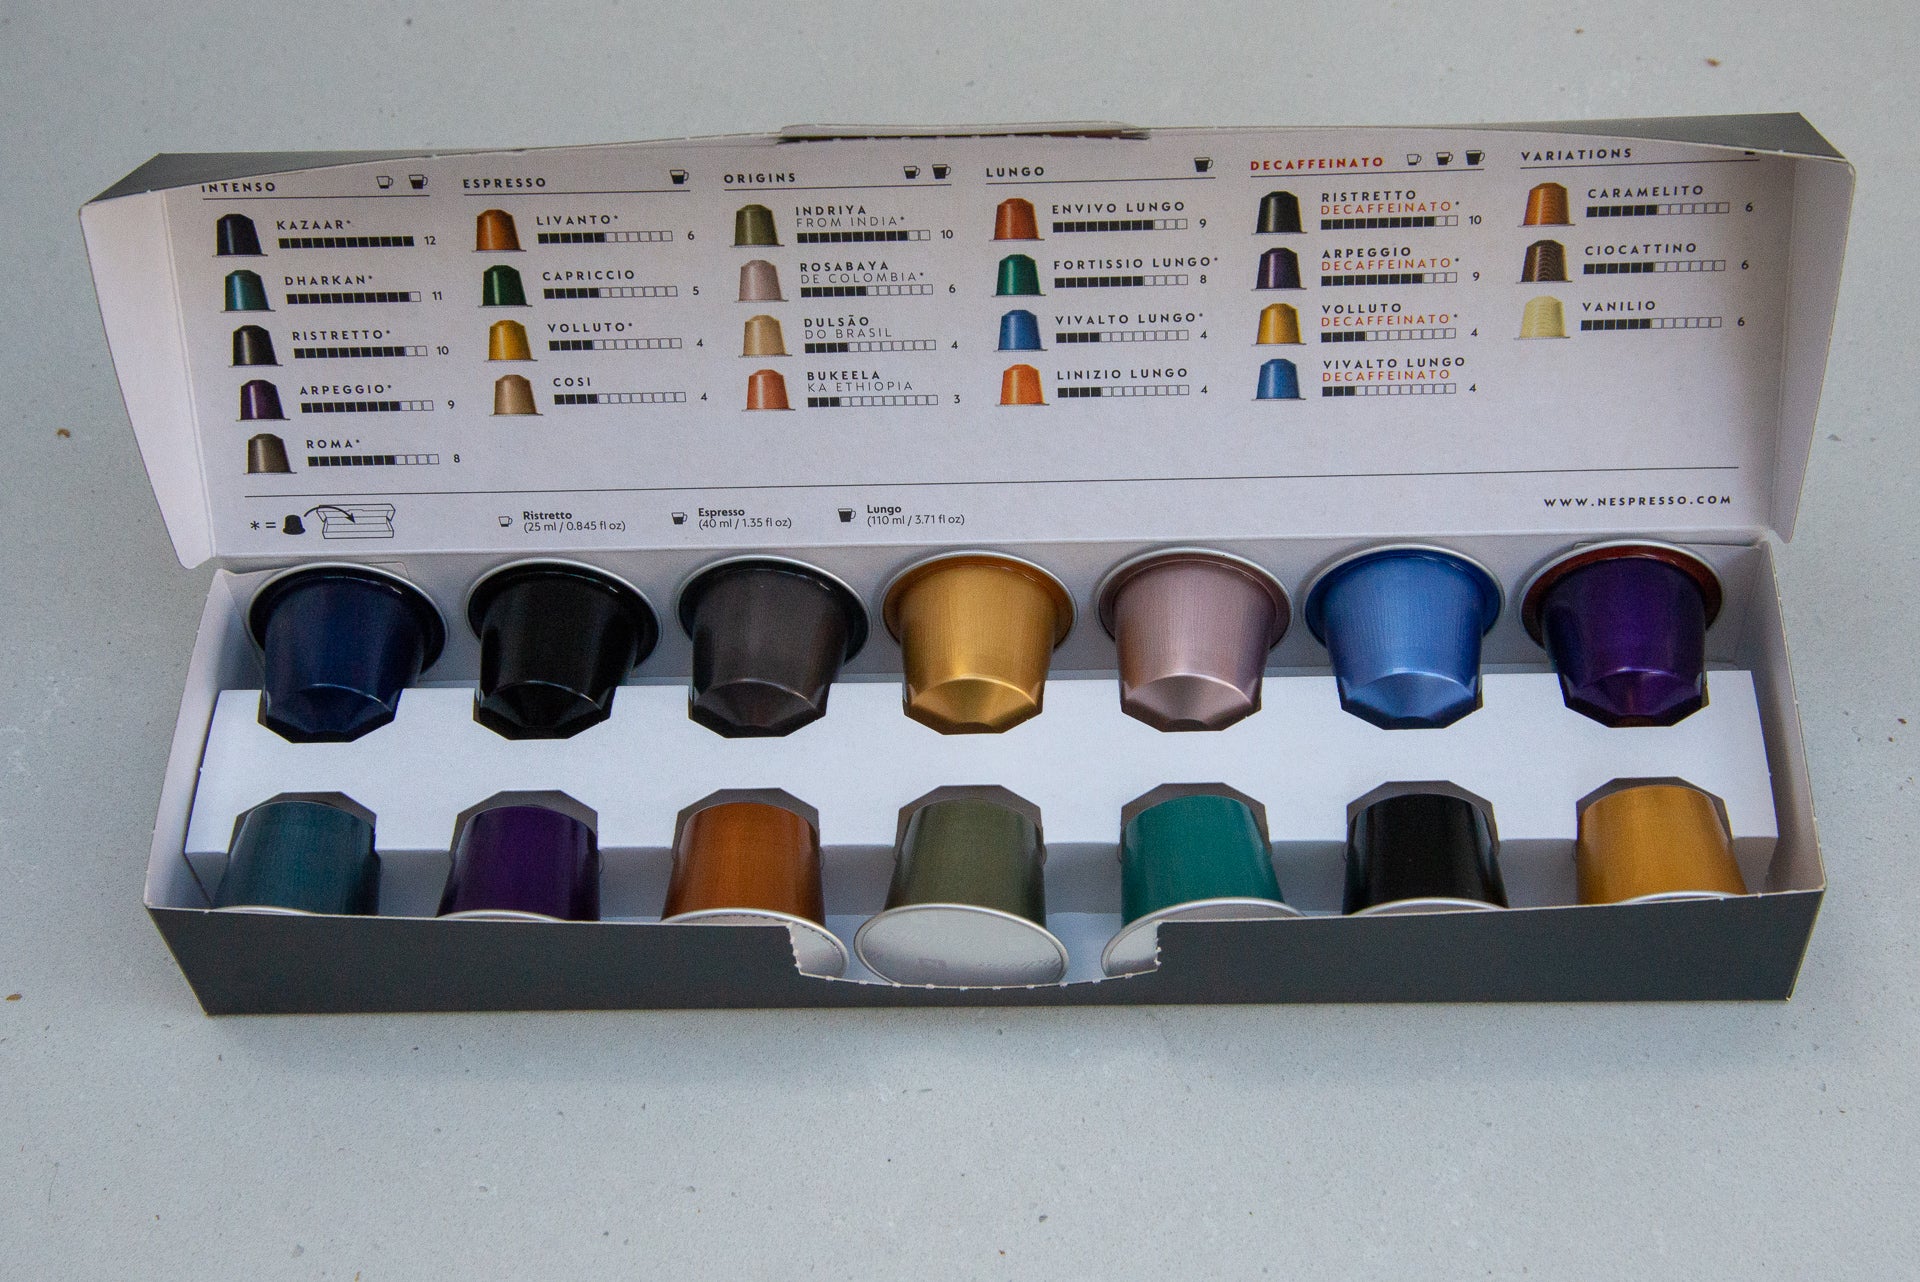 Nespresso Caffeine Content: How Much Is It in Different Capsule Types?